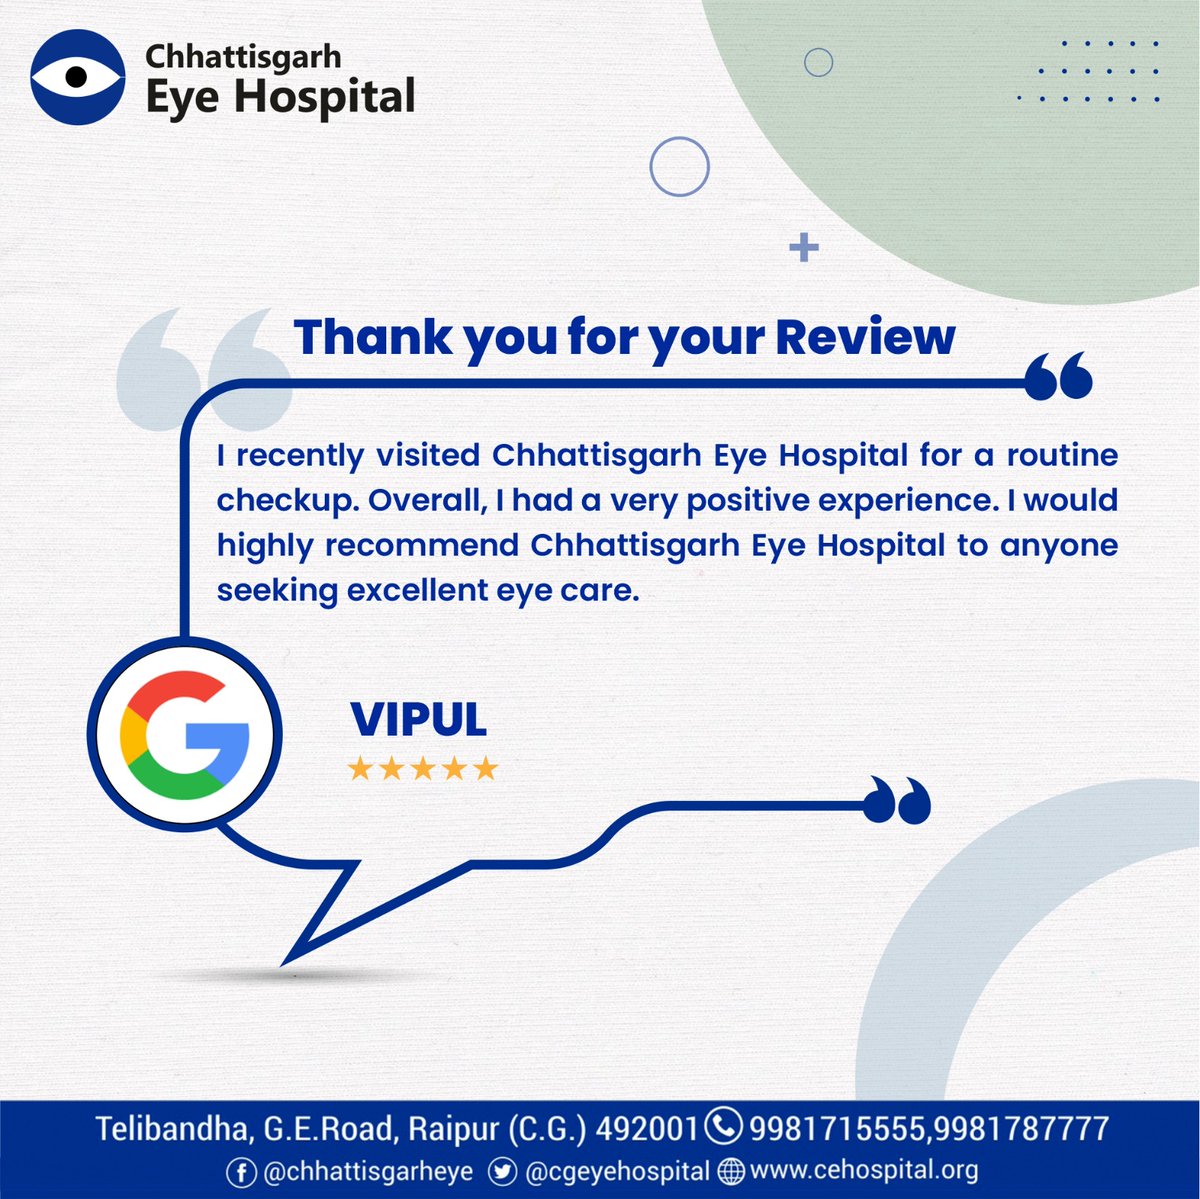 Thank you for the kind words. We're thrilled you had a positive experience at Chhattisgarh Eye Hospital.
#chhattisgarheyehospital #eyehospital #eyetreatment #googlereviews